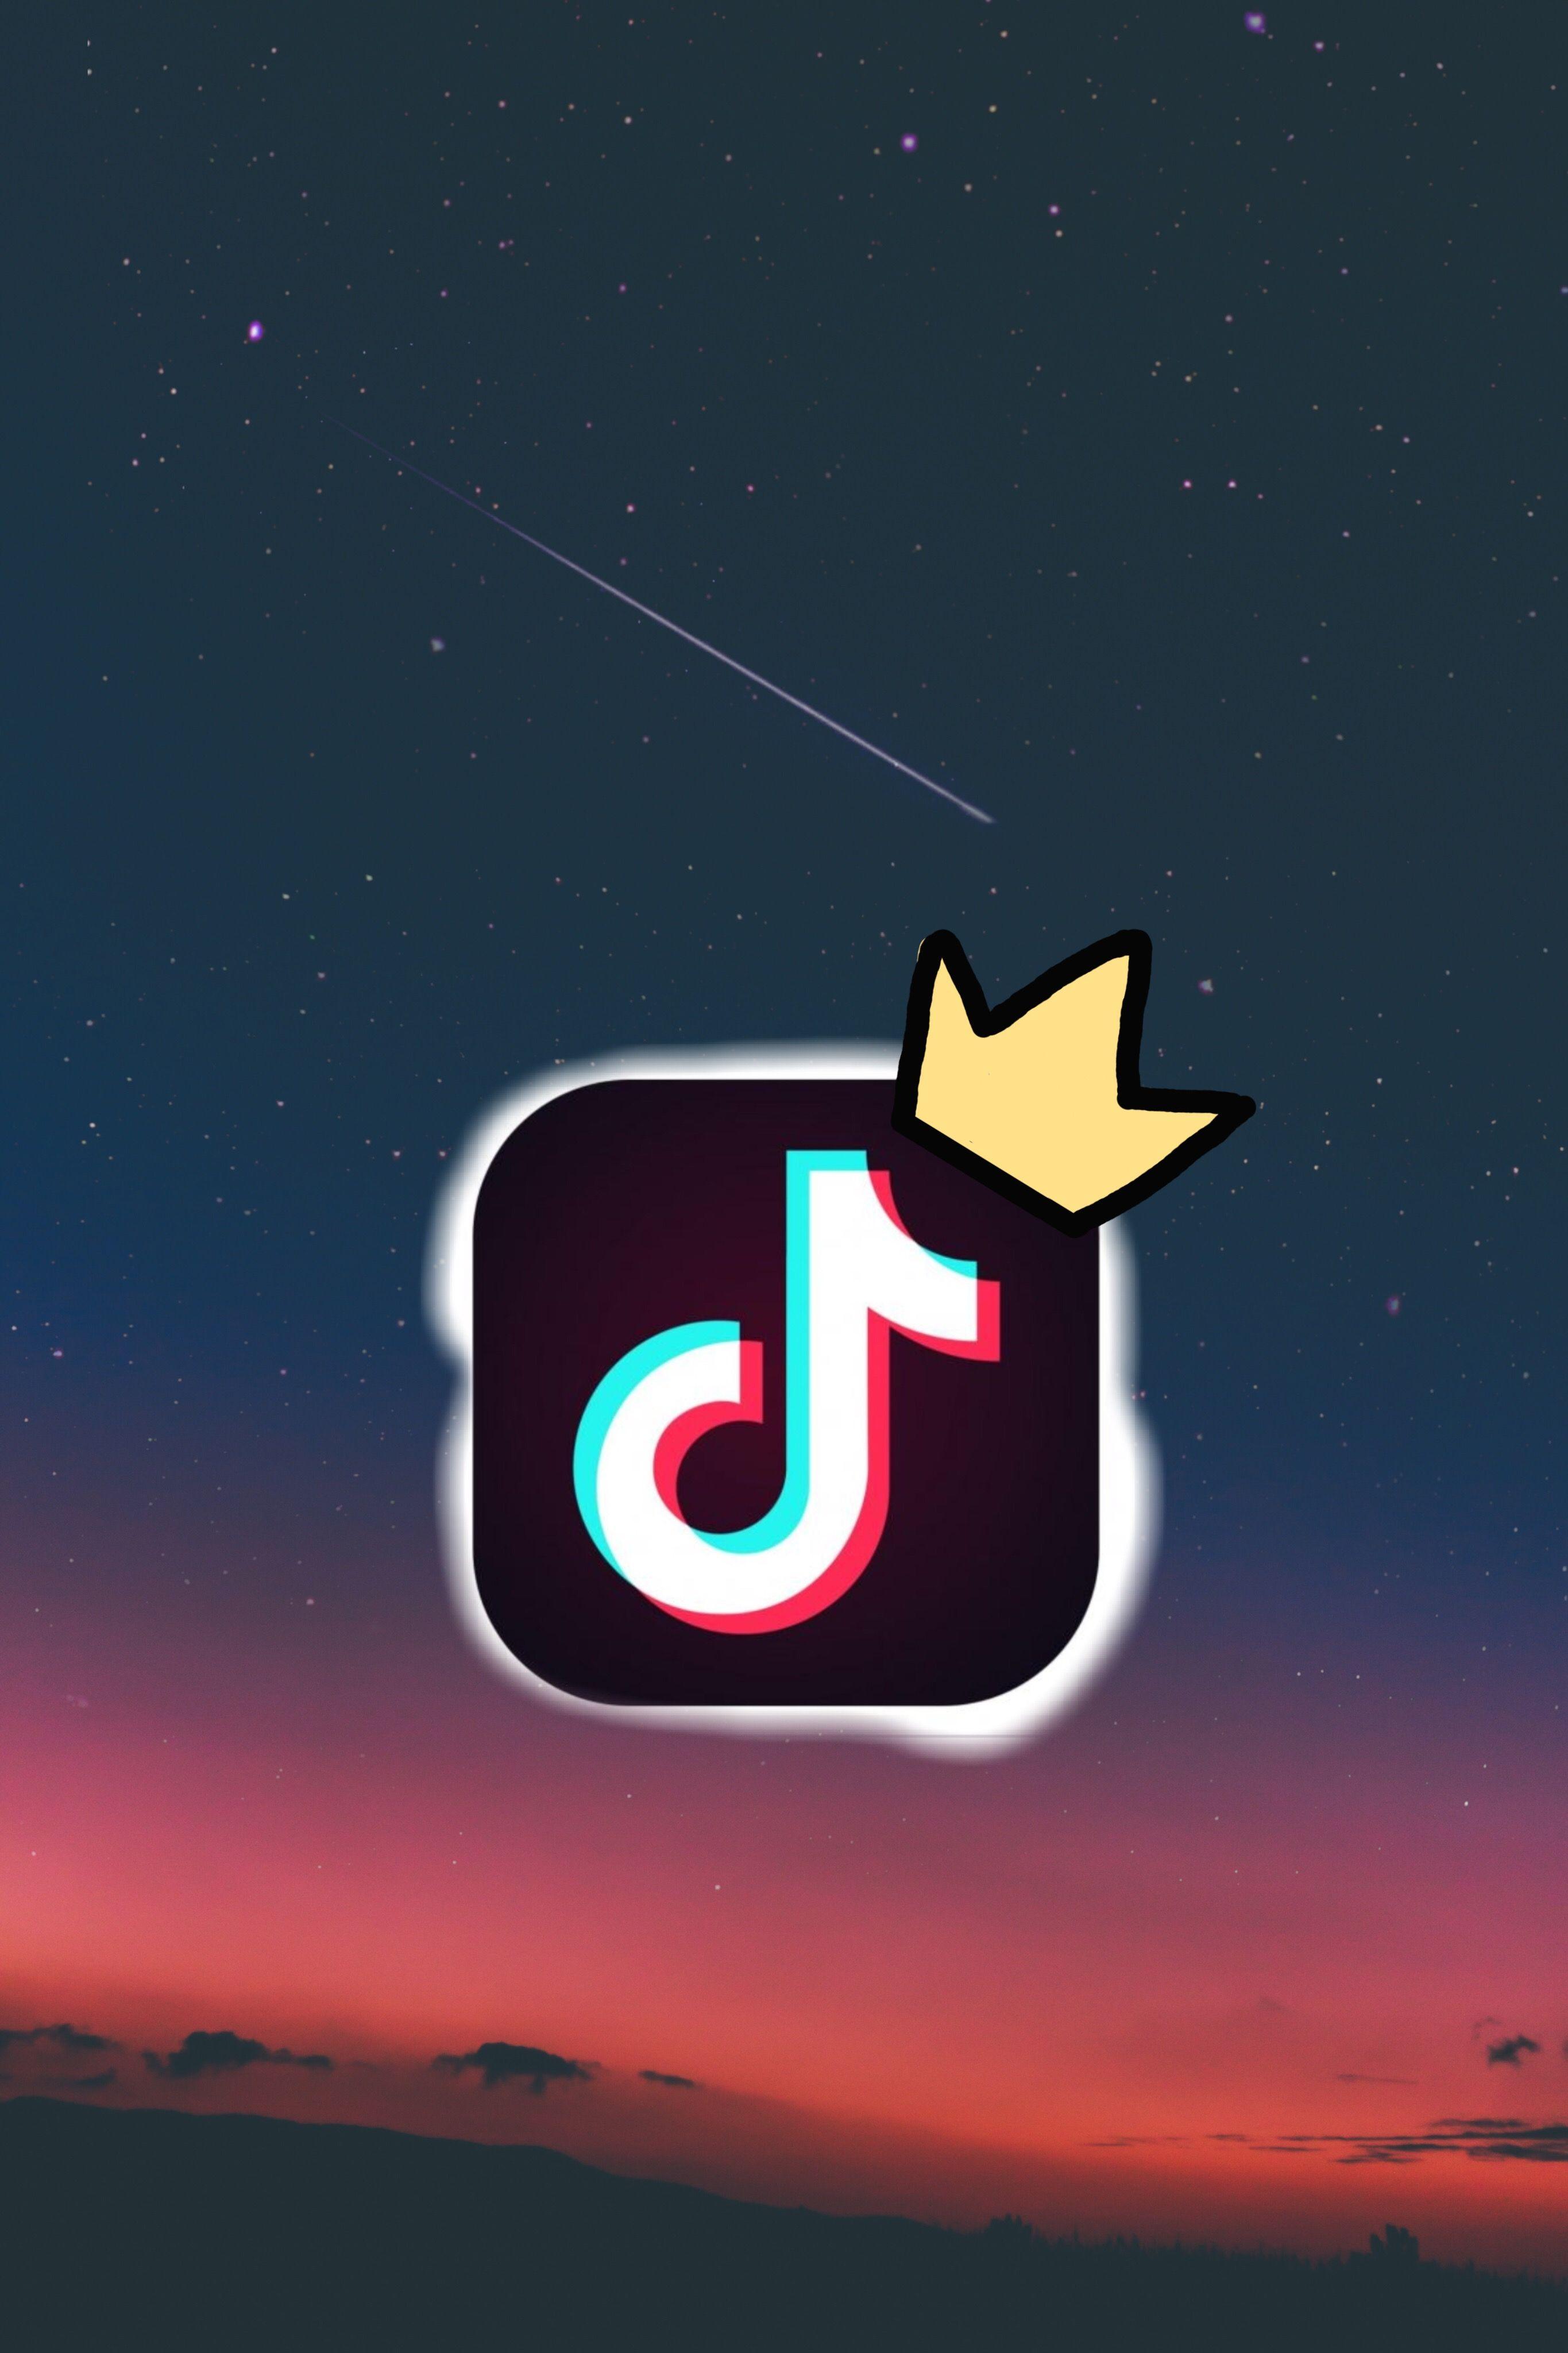 Tiktok Aesthetics Wallpapers Top Free Tiktok Aesthetics Backgrounds Wallpaperaccess All orders are custom made and most ship worldwide within 24 hours. tiktok aesthetics wallpapers top free